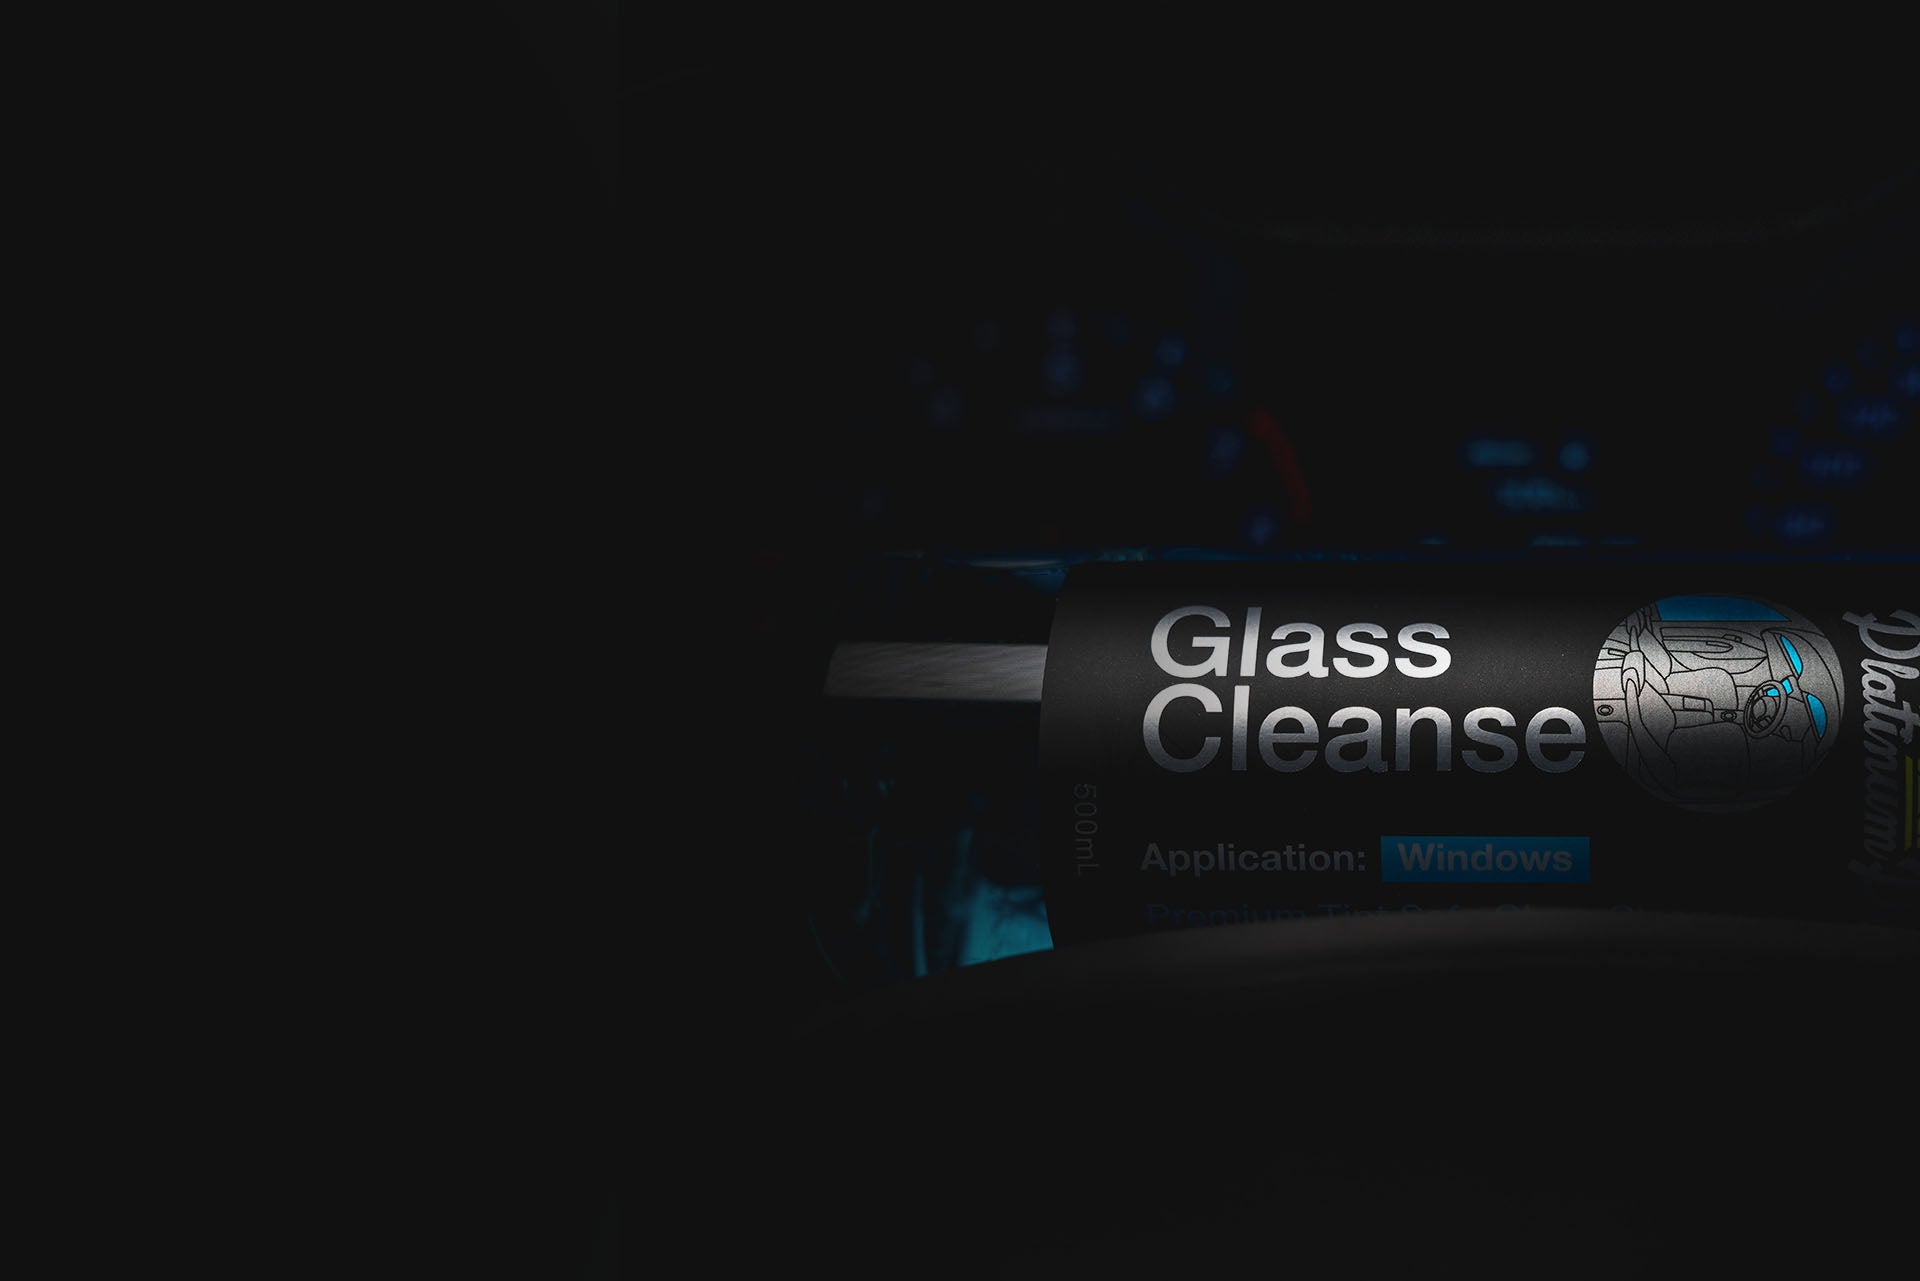 Platinum Potions Streak-Free Glass Cleaner | Glass Cleanse - Parks Car Care 